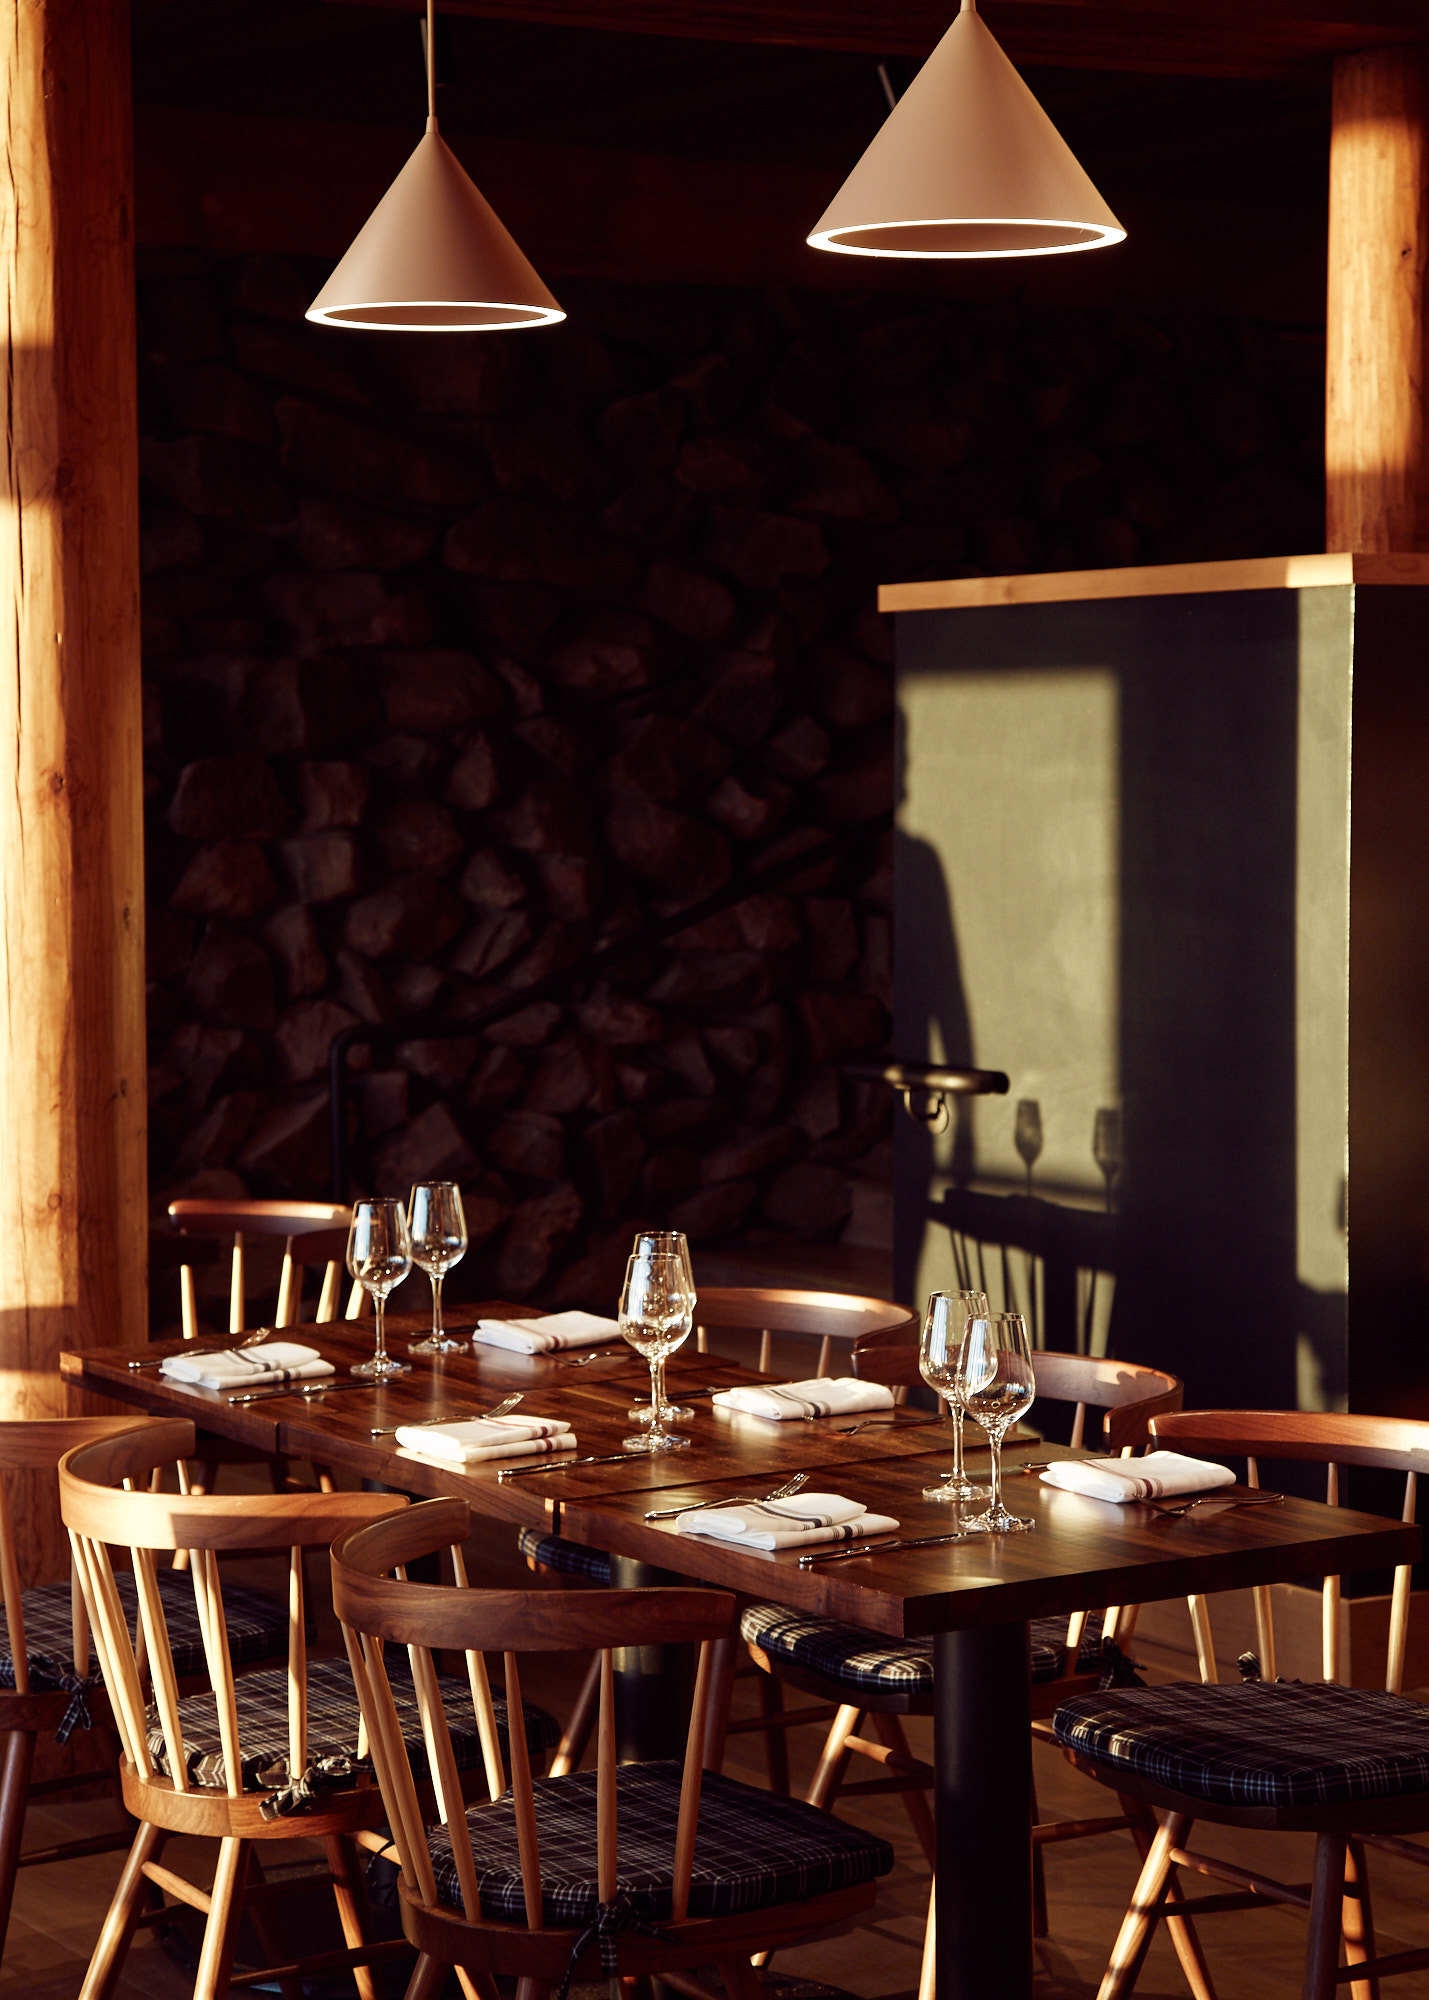 Hospitality photograph for rustic restaurant in Russian River